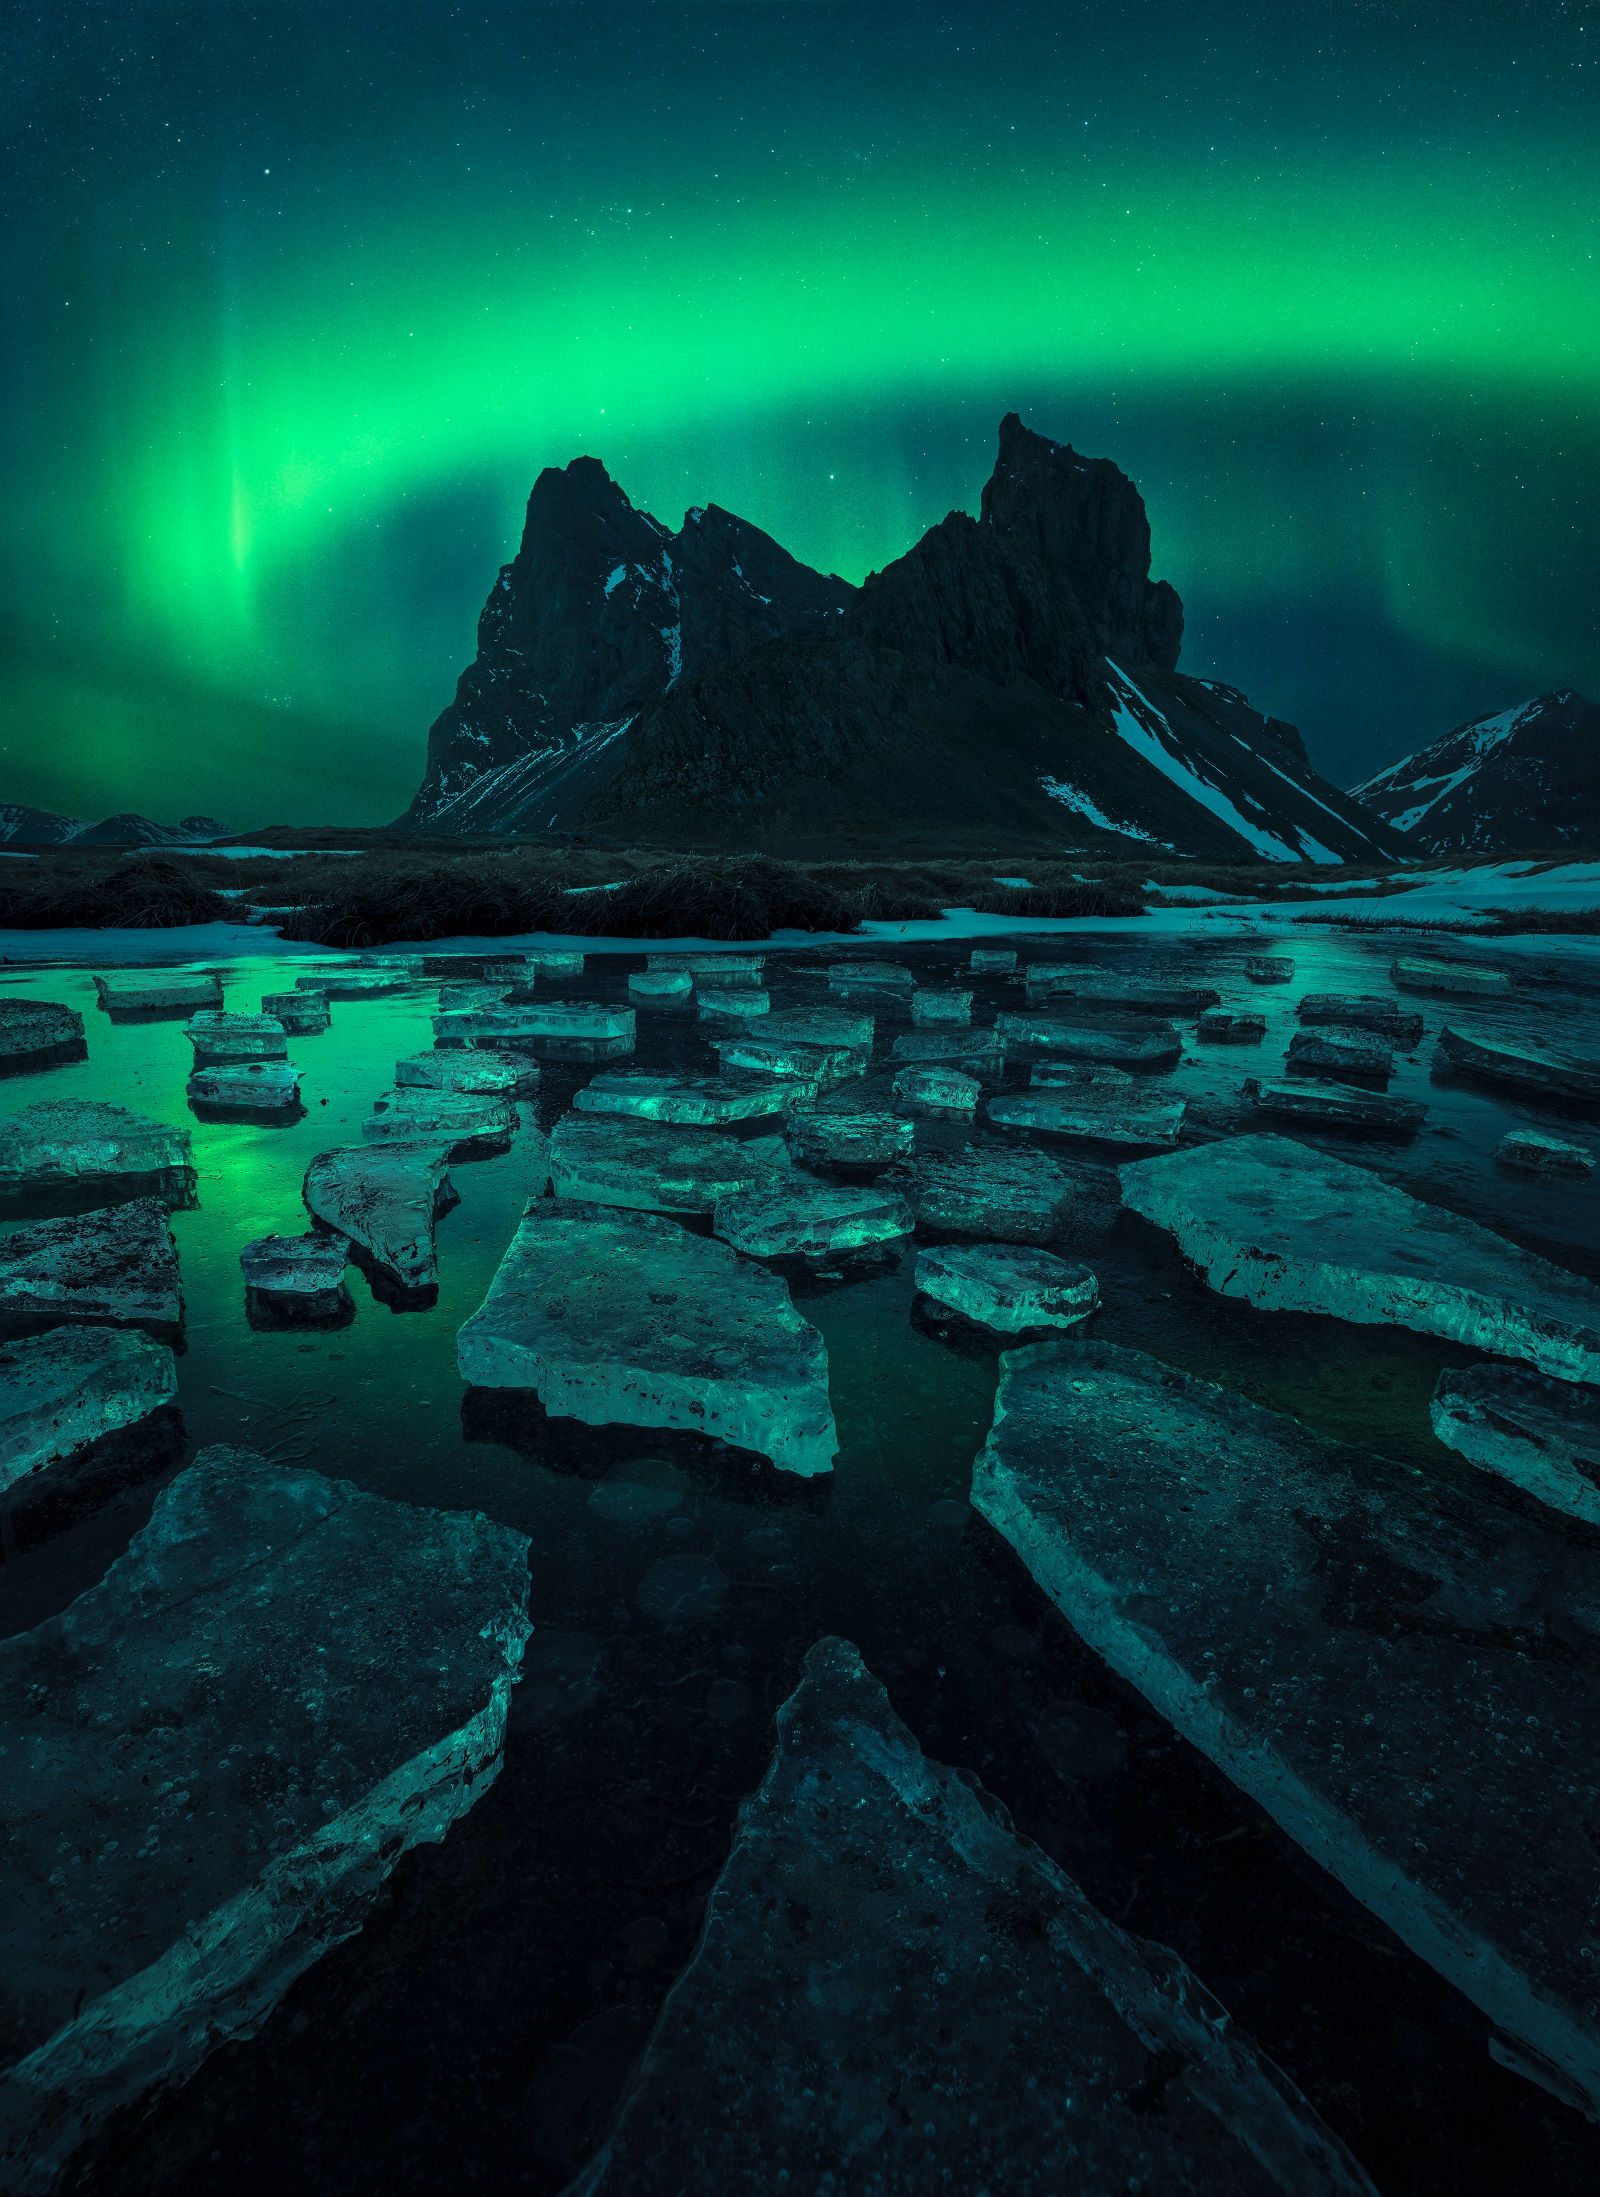 Check out these stunning photos from the 2020 Astronomy Photographer of the Year award photo 52